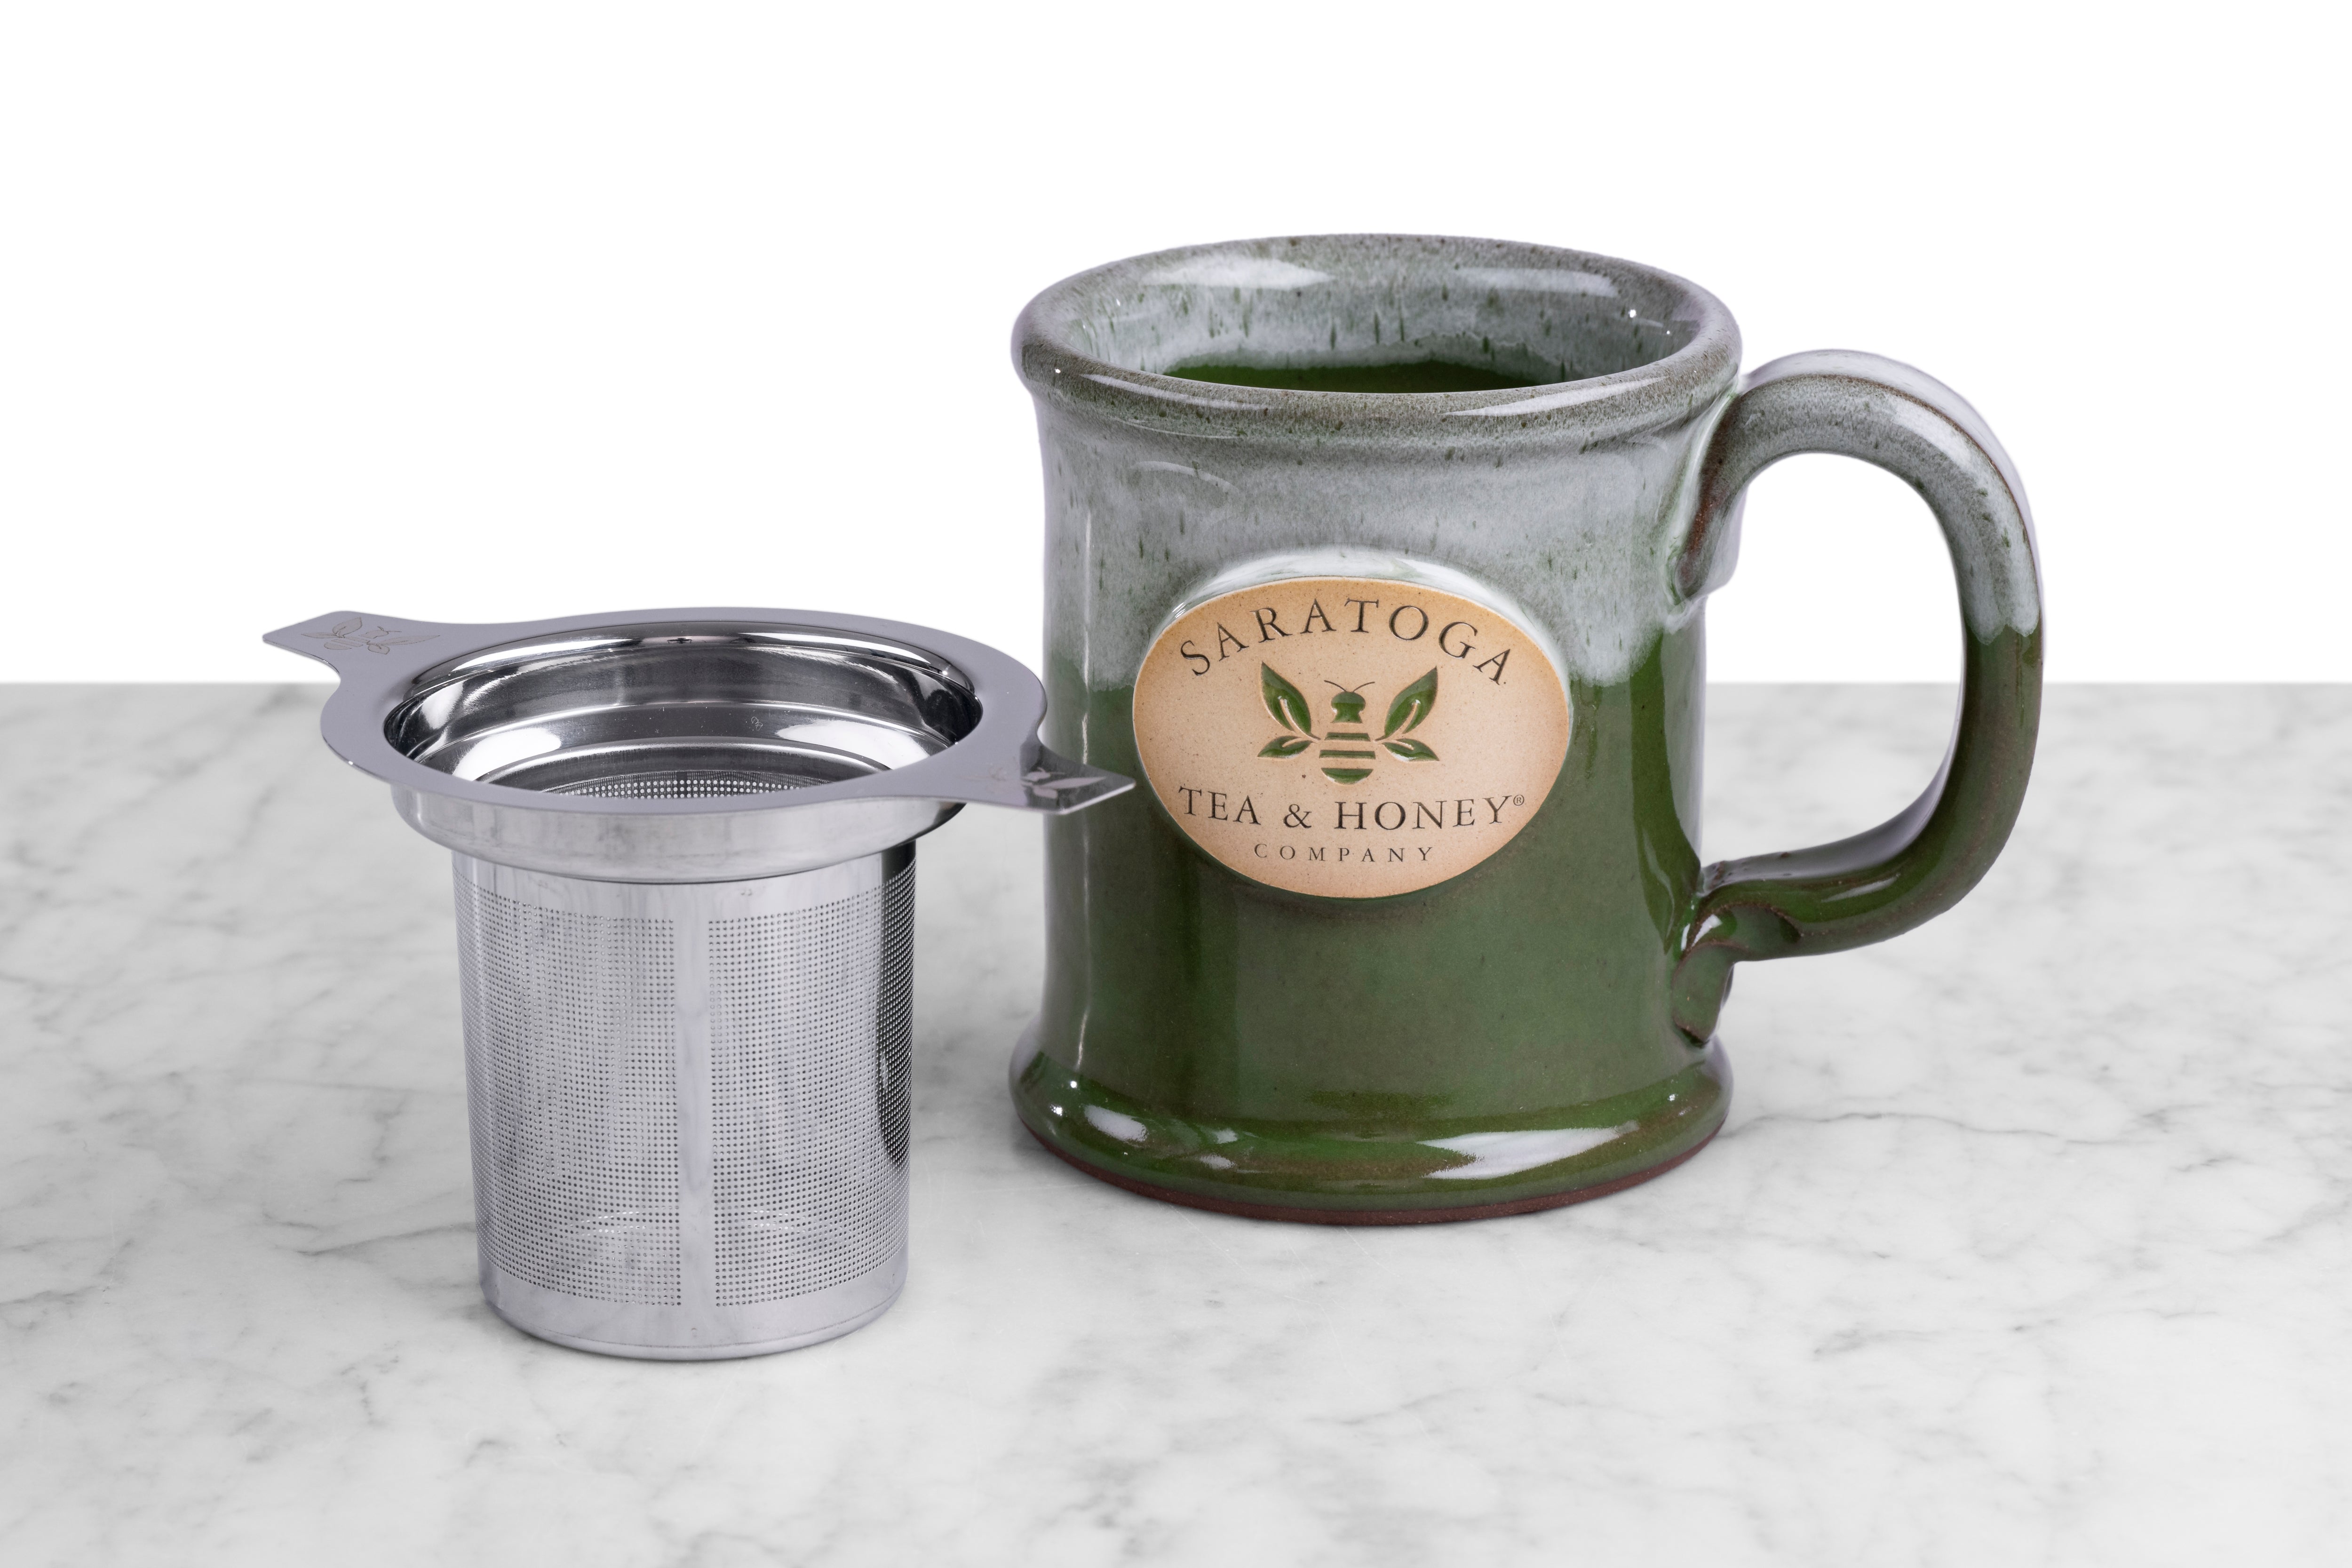 saratoga tea and honey co mug and stainless steel infuser bundle on a mabrle and white background